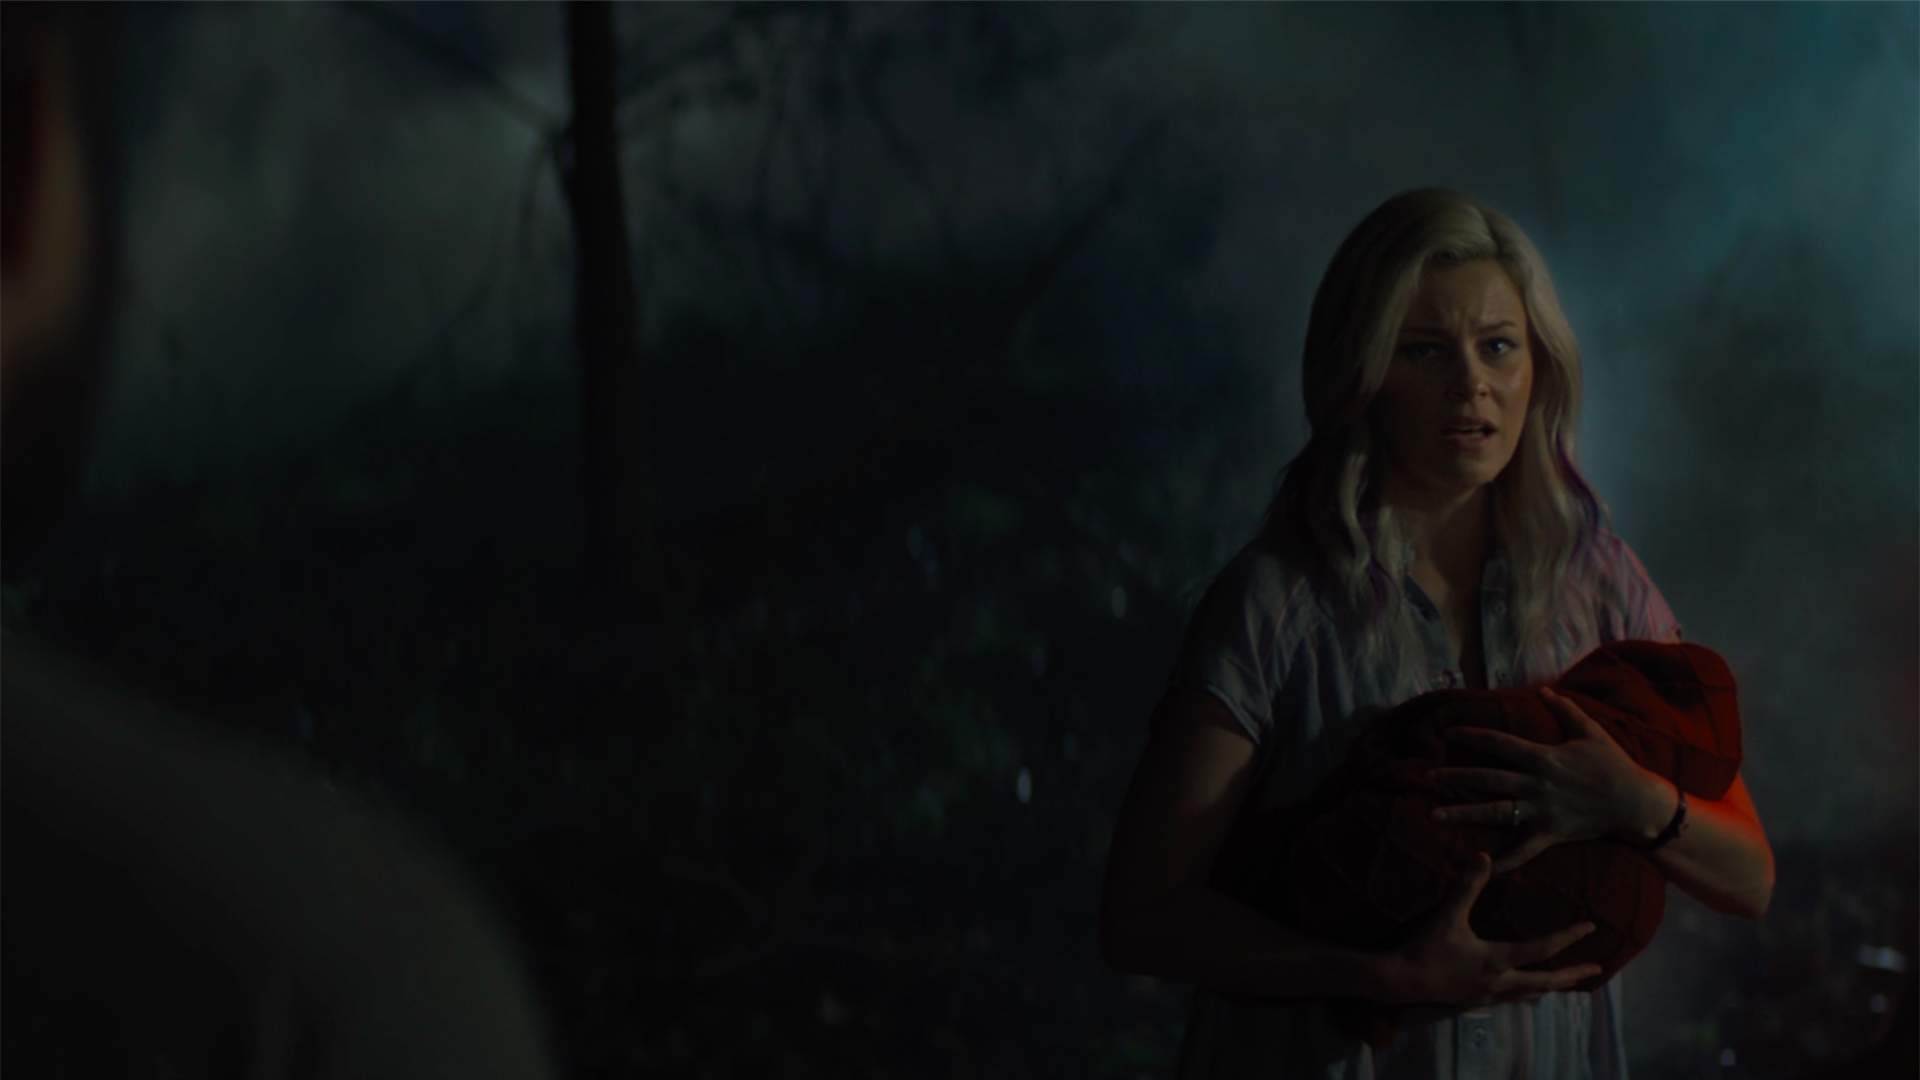 Superheroes and Horror Combine in the Trailer for Dark and Creepy New Thriller 'Brightburn'